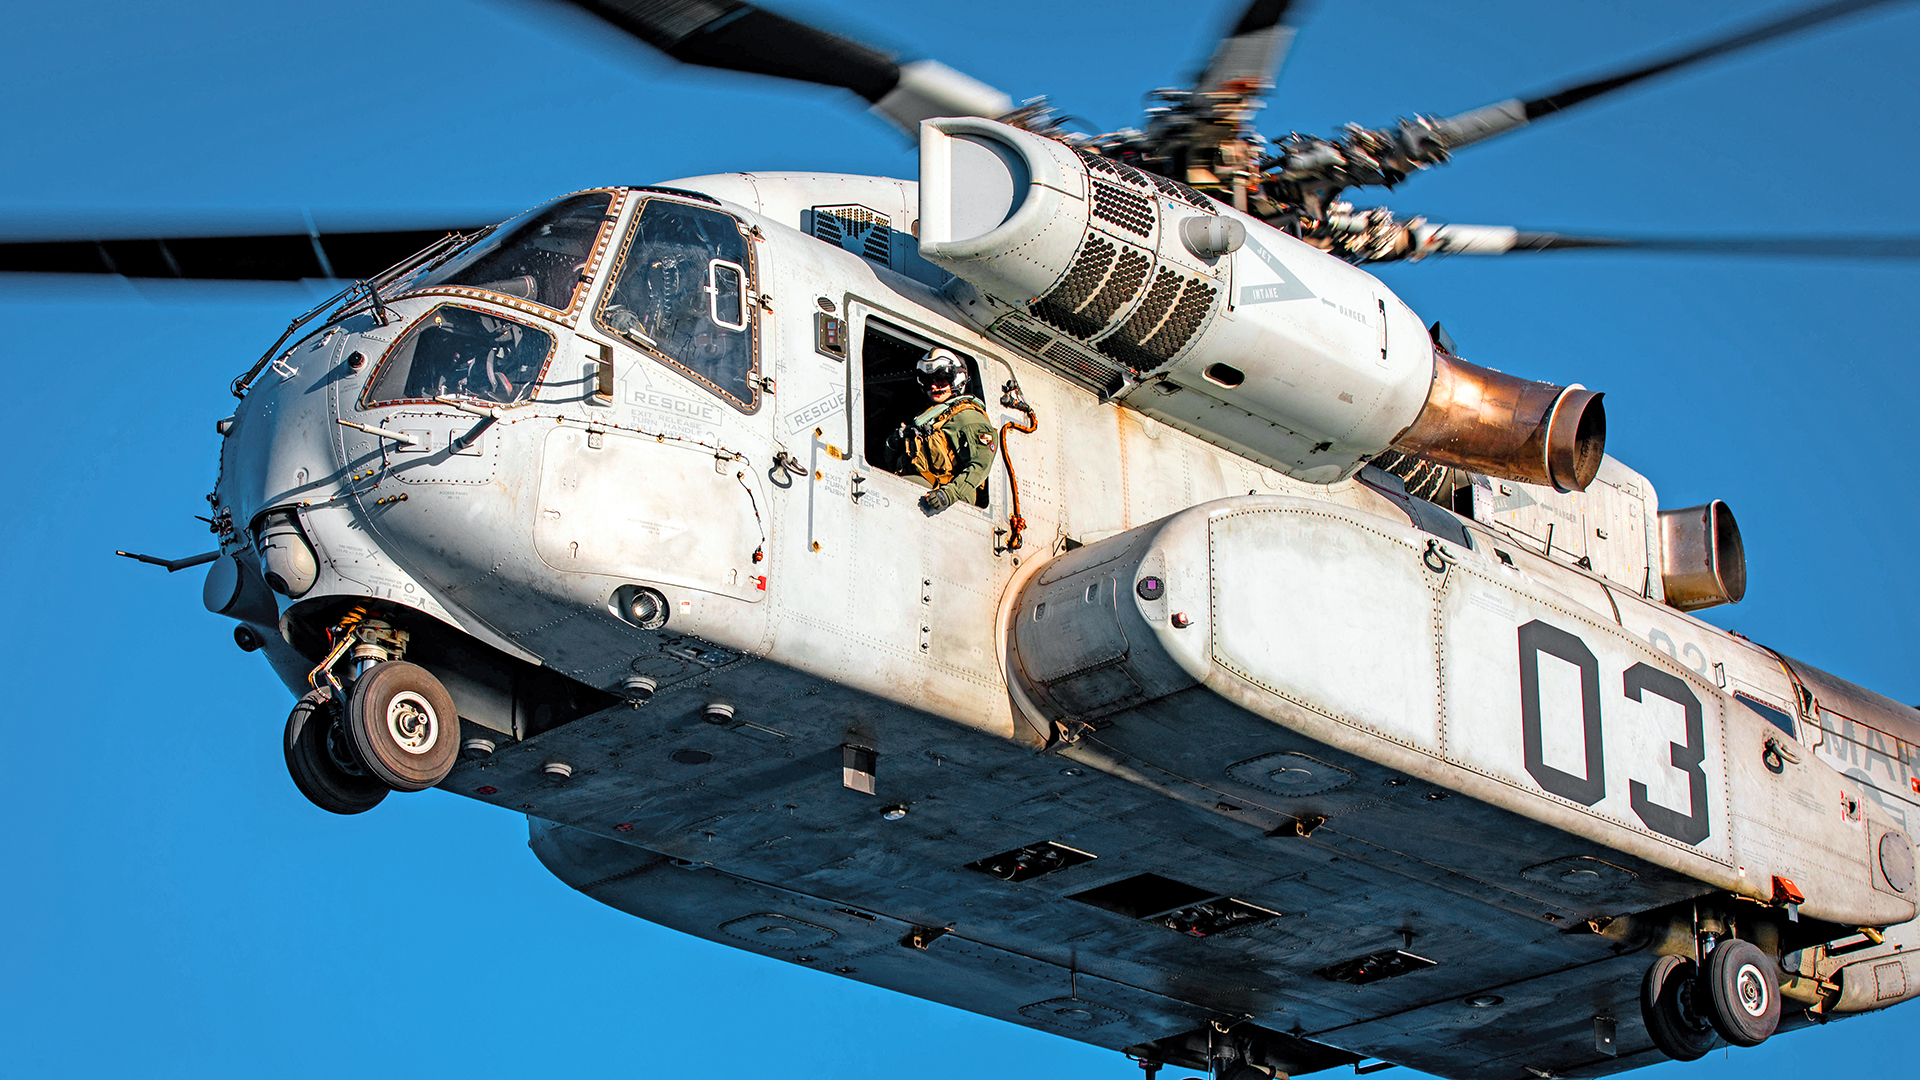 CH-53K King Stallion arrives in Yuma to join VMX-1.